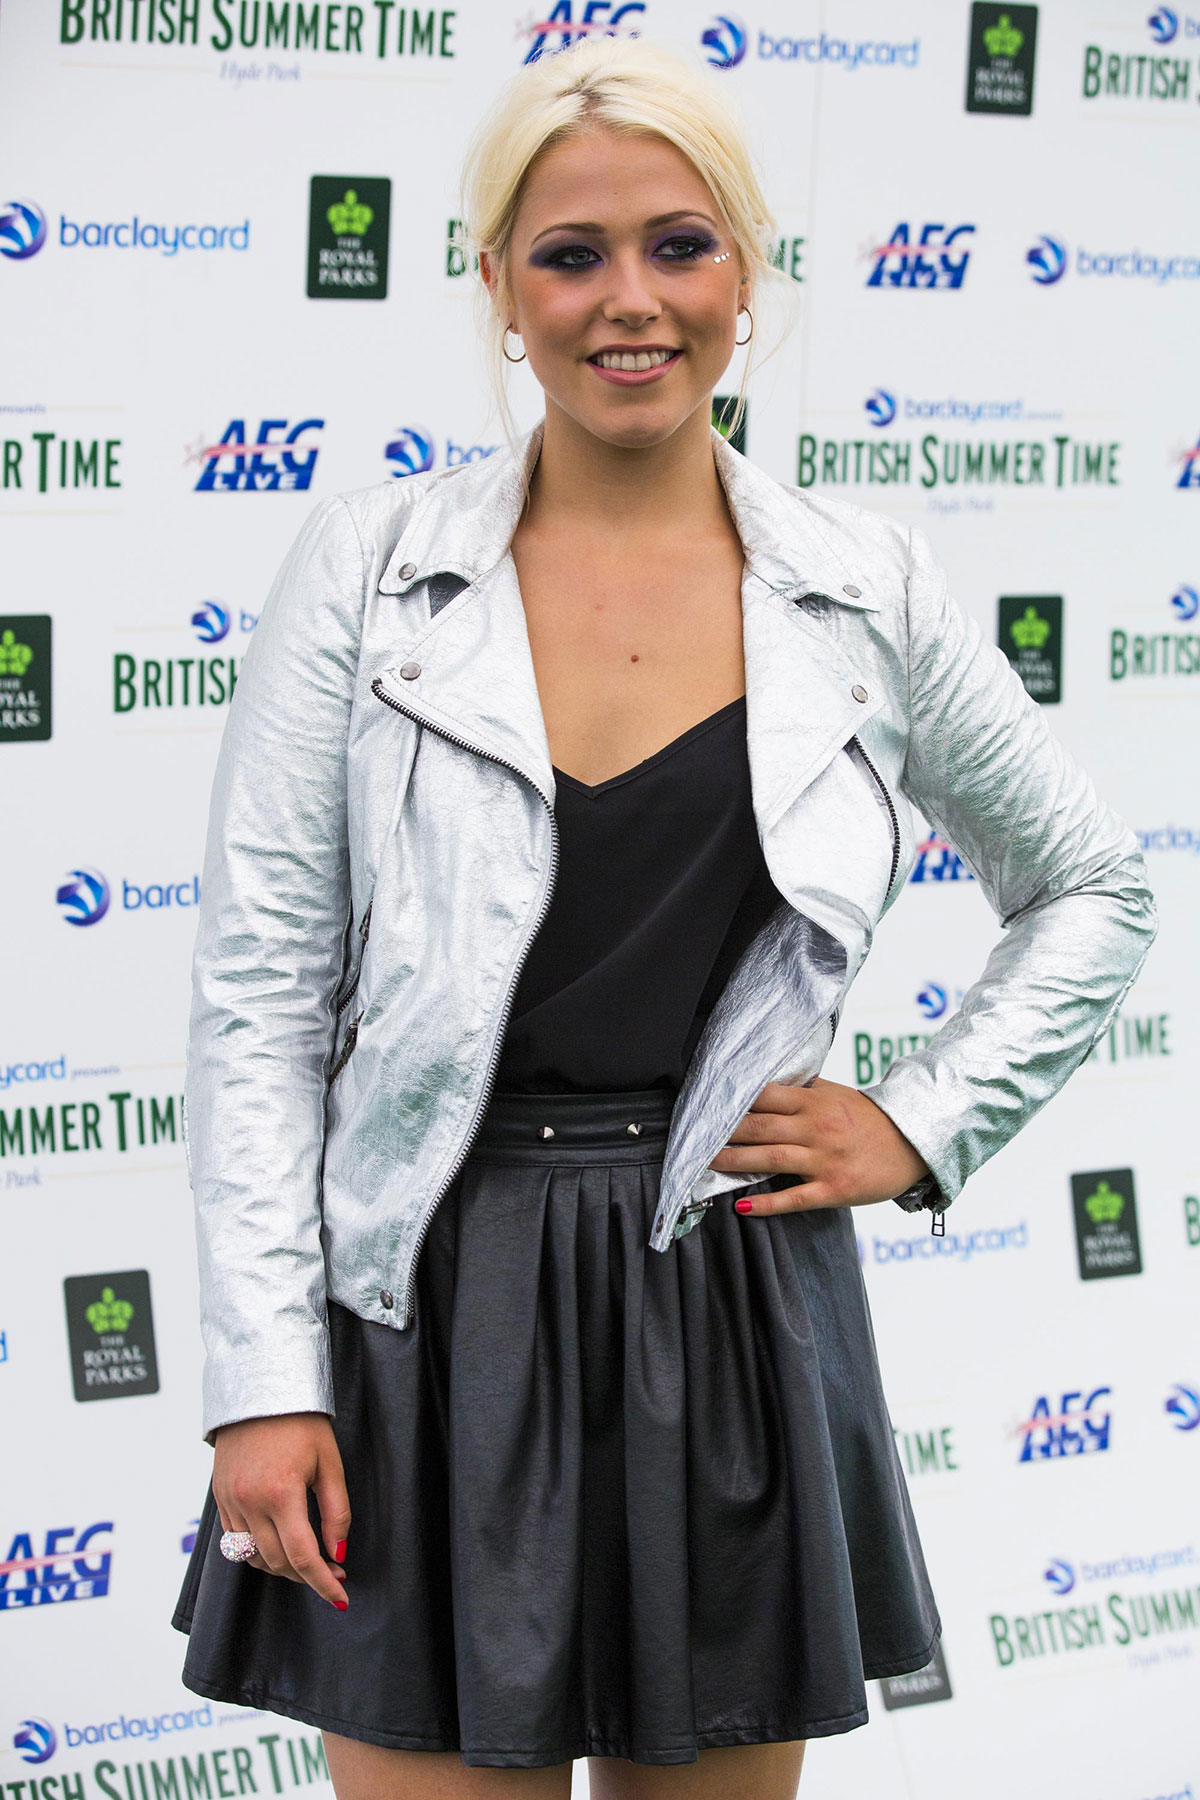 Amelia Lily backstage at British Summer Time Festival